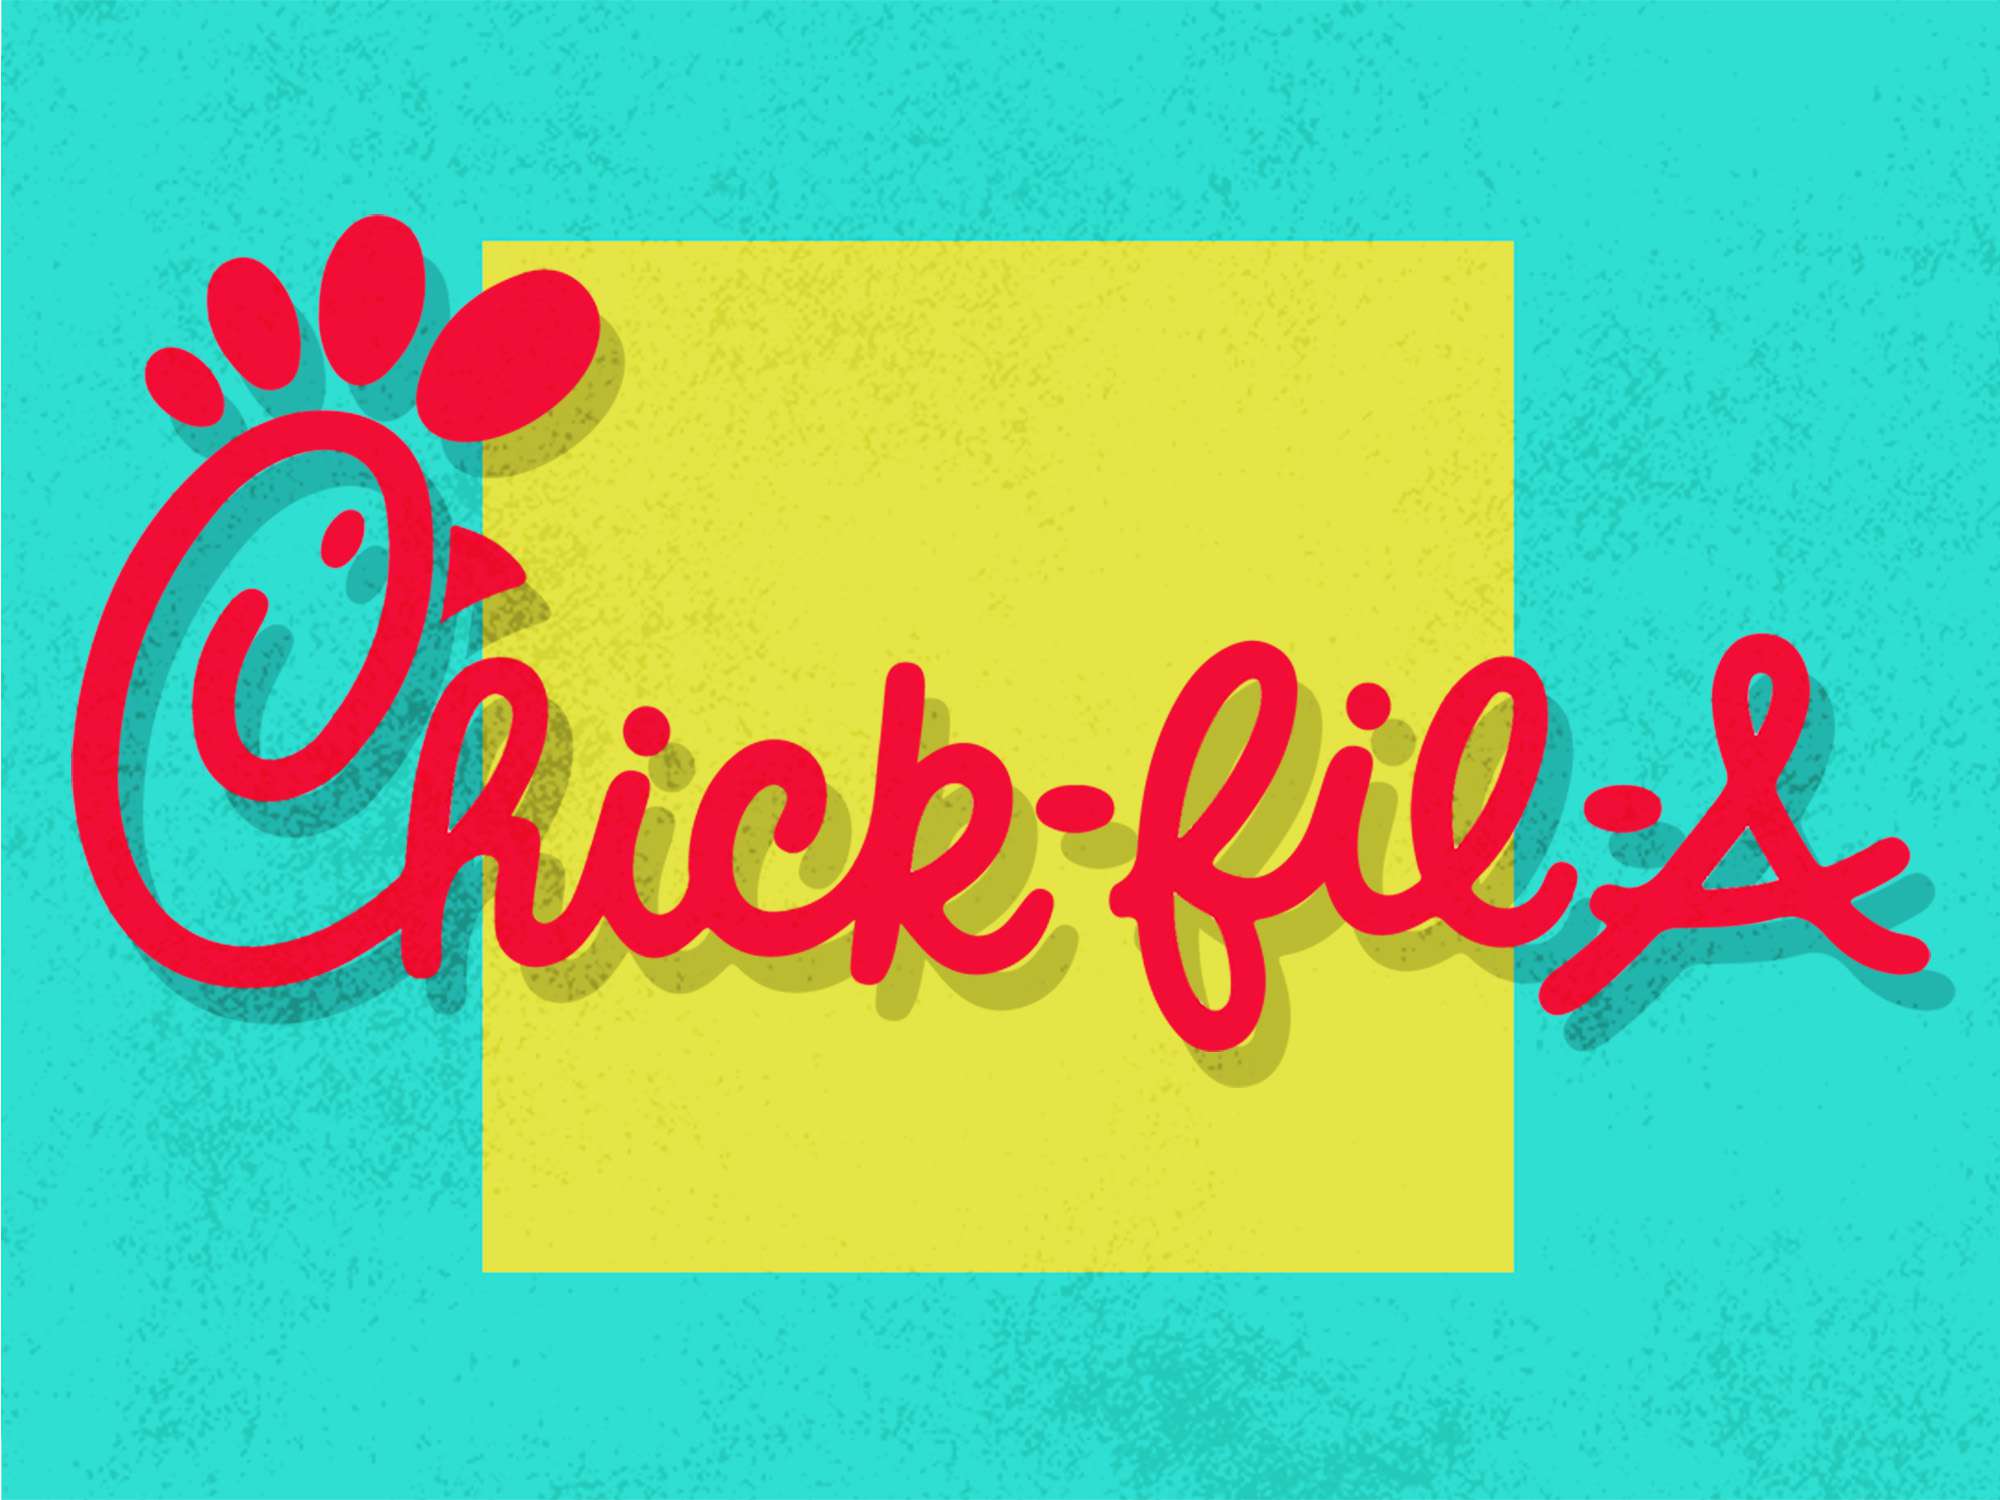 This Chick-fil-A Controversy Has The Internet Fired Up